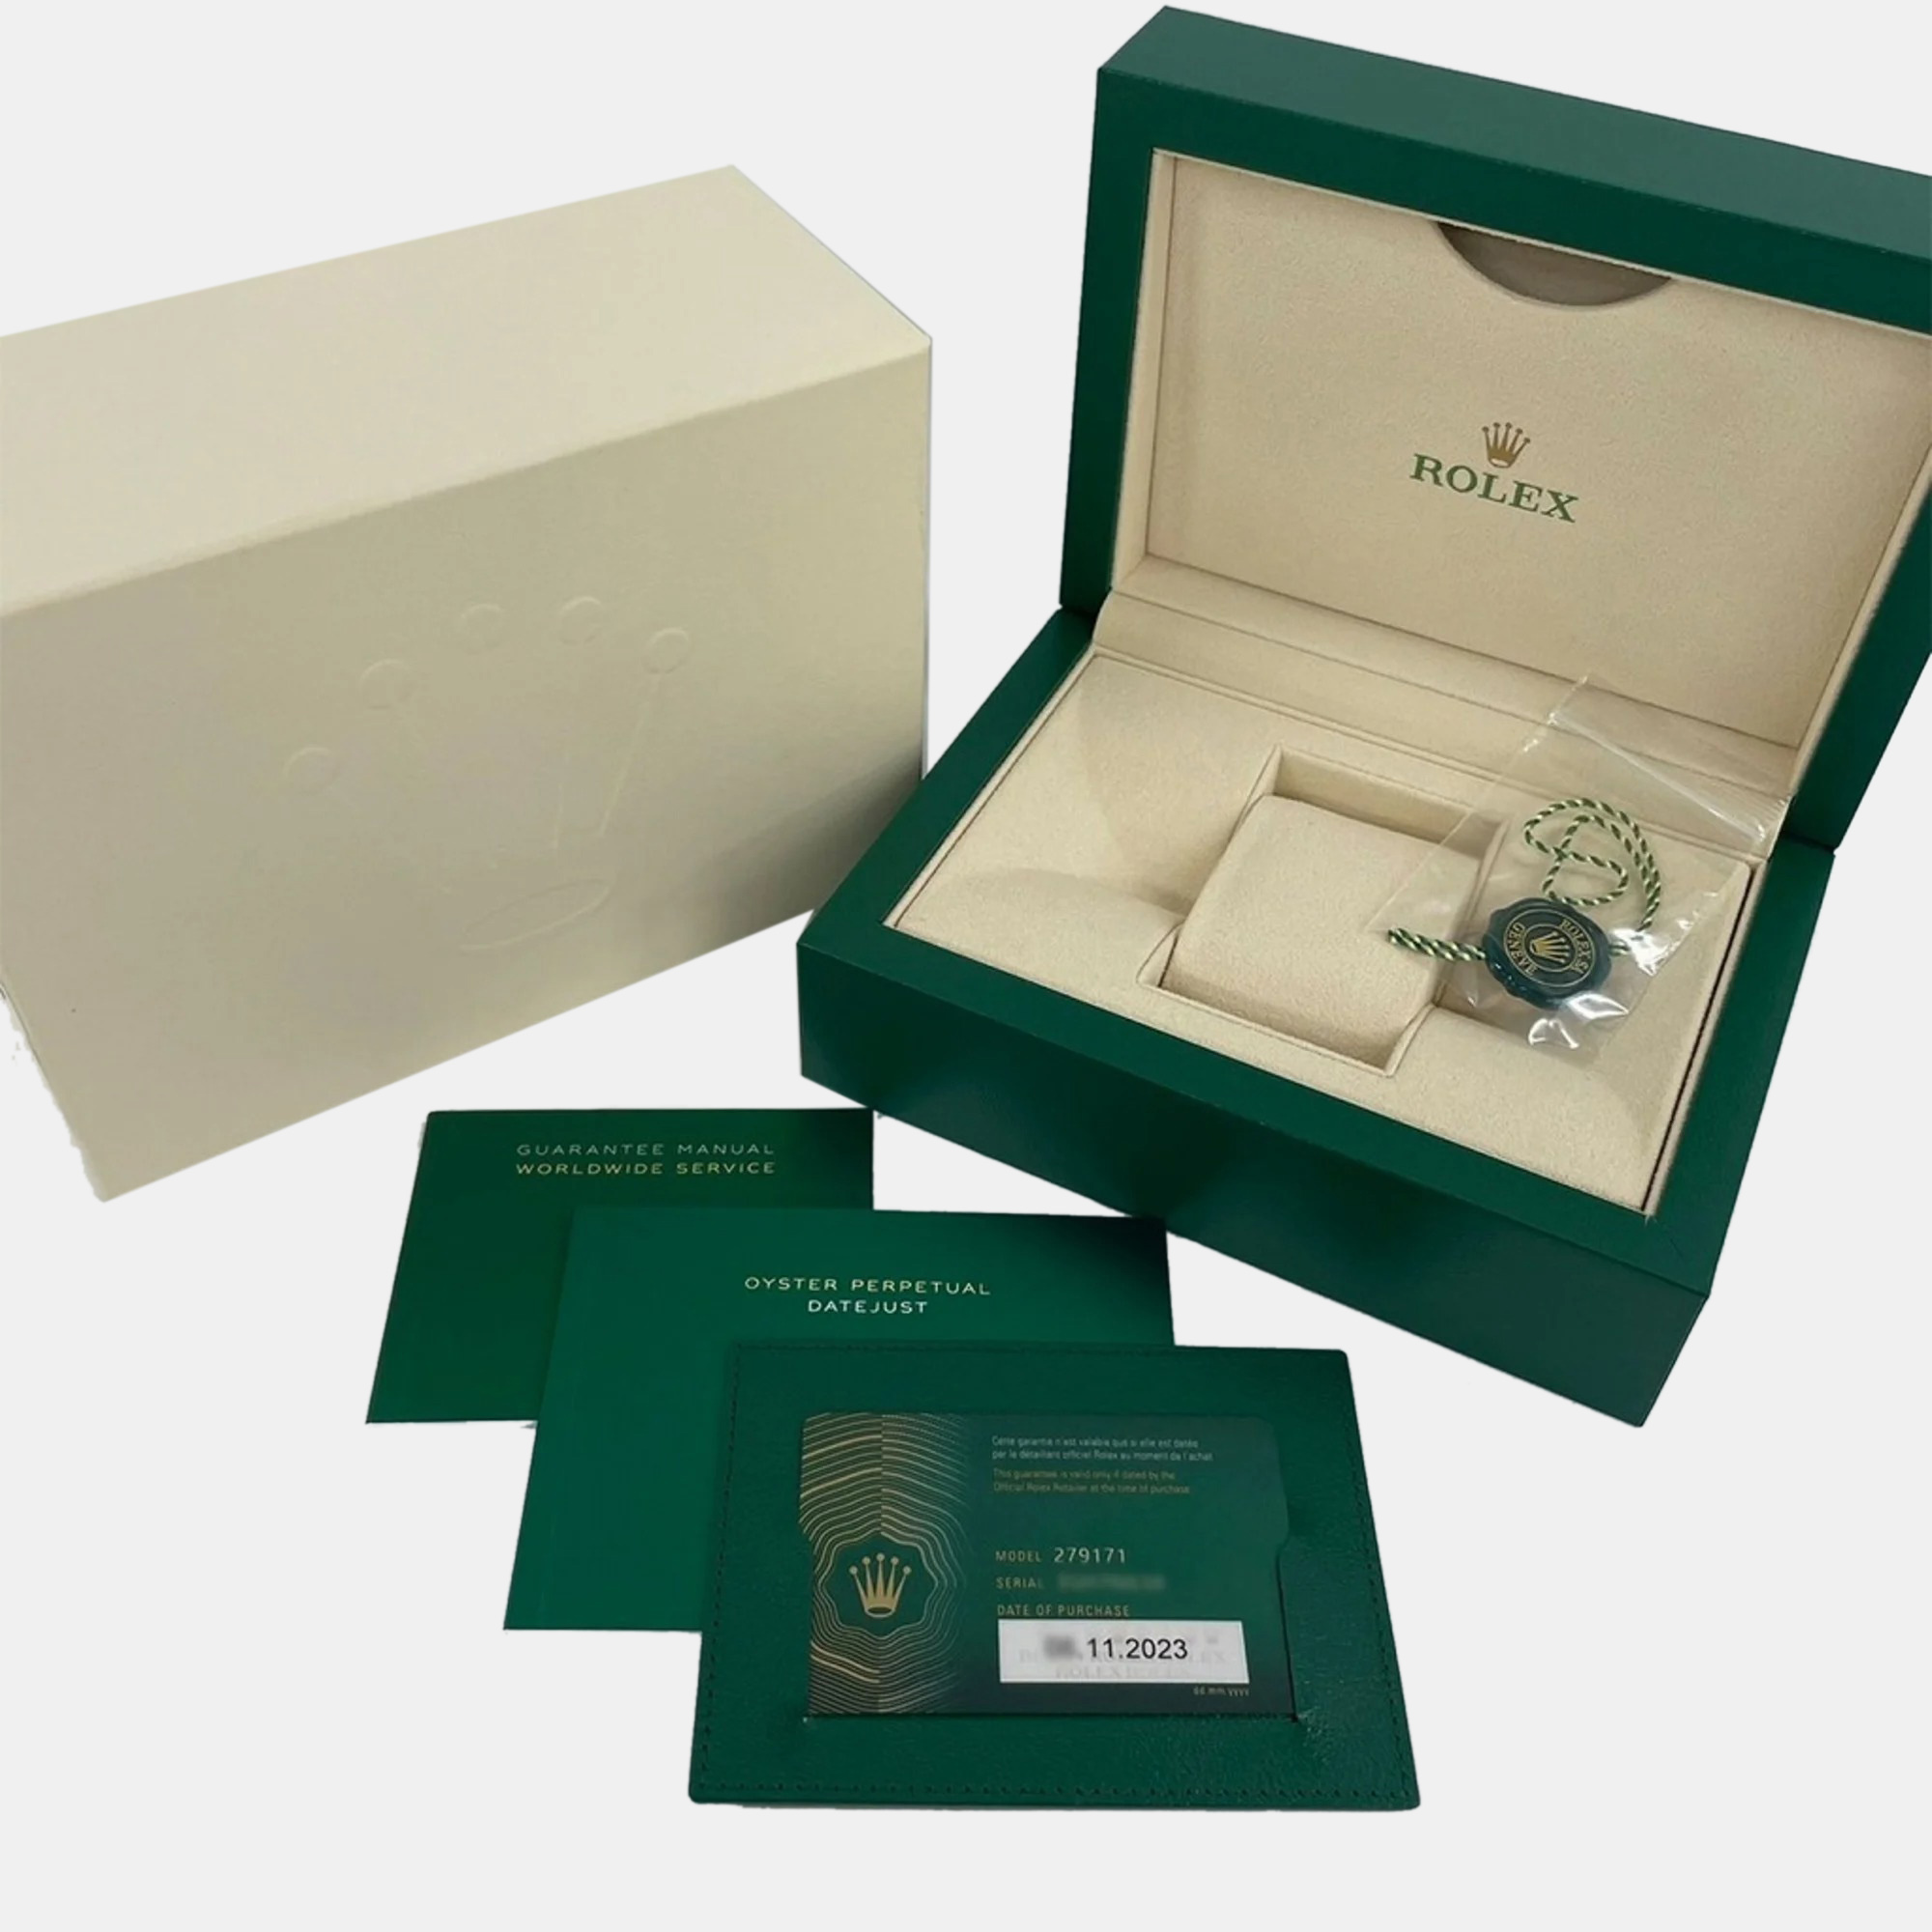 Rolex Champagne 18k Yellow Gold And Stainless Steel Sky-Dweller 326933 Automatic Men's Wristwatch 42 Mm